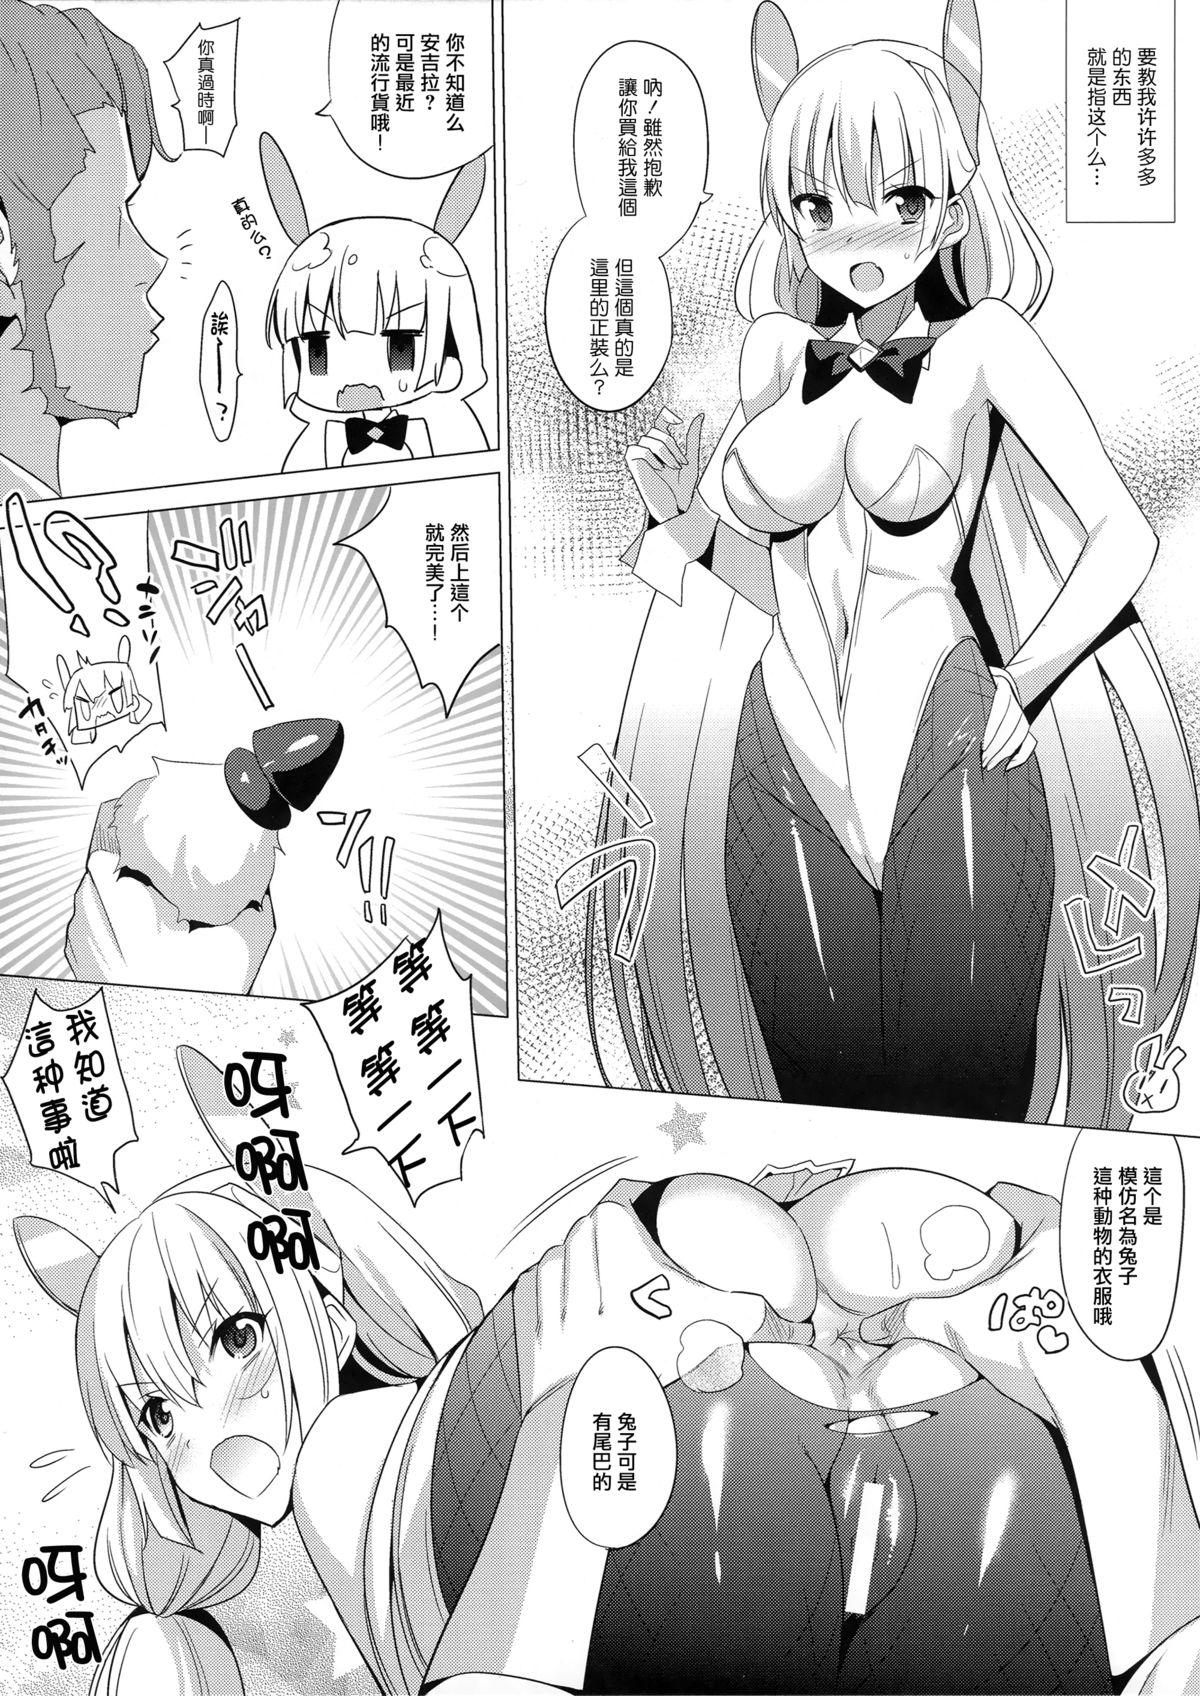 Foot Worship Rakuen e Youkoso 2 First Rabbit - Expelled from paradise Assgape - Page 5